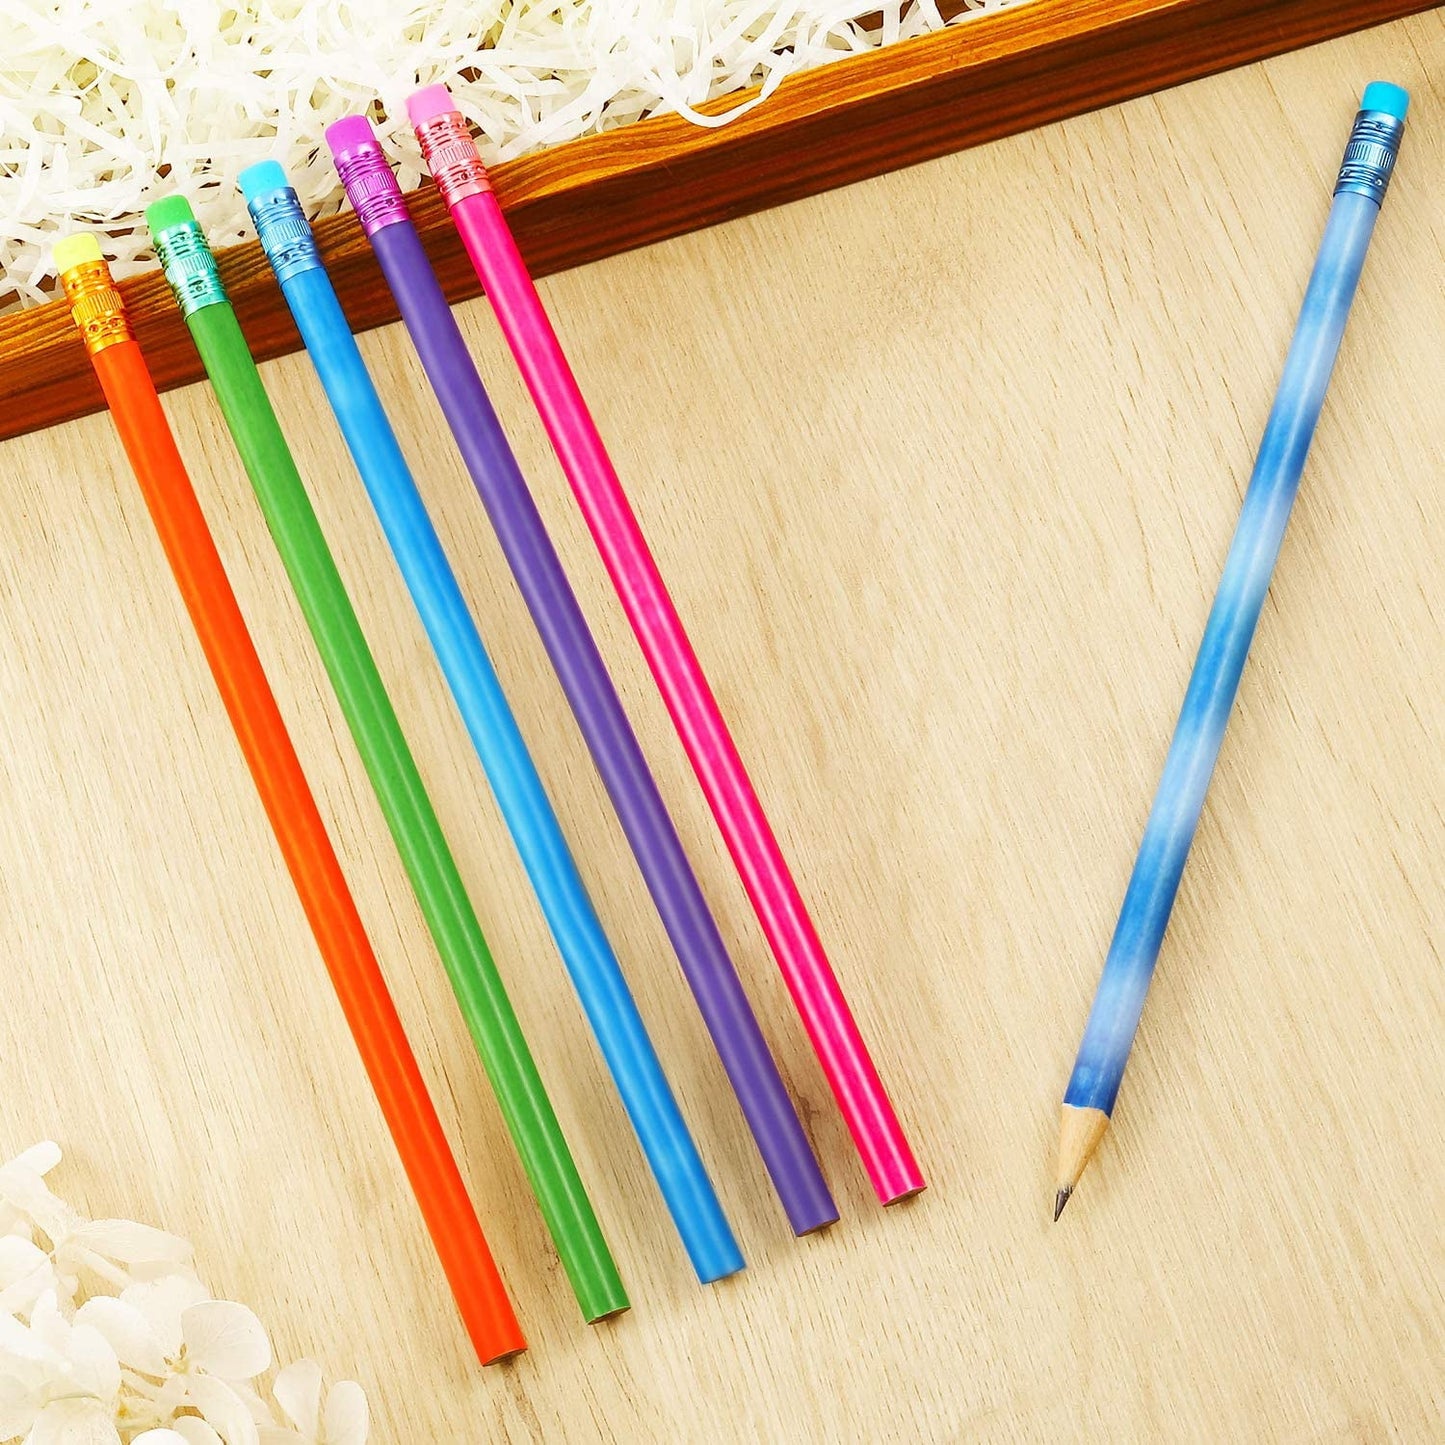 QUMENEY 30Pcs Color Changing Mood Pencil with Eraser Wooden Pencils Heat Activated Color Changing Pencils Thermochromic Assorted Colors